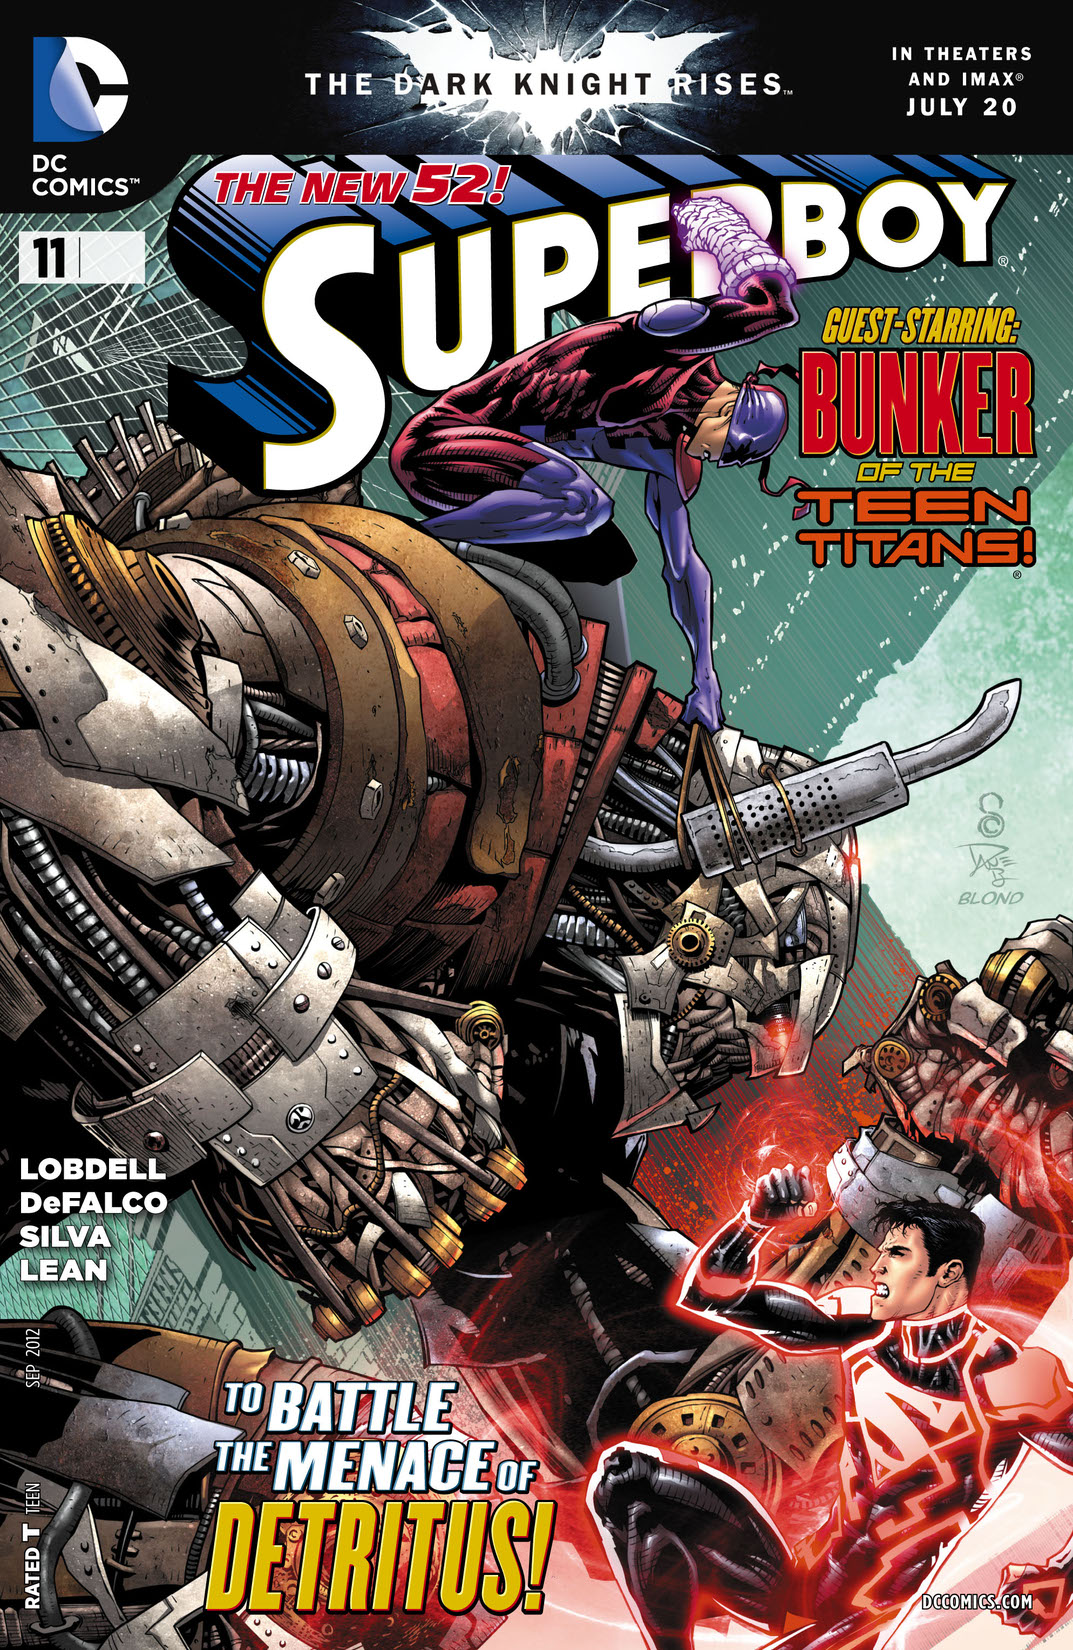 Superboy (2011-) #11 preview images